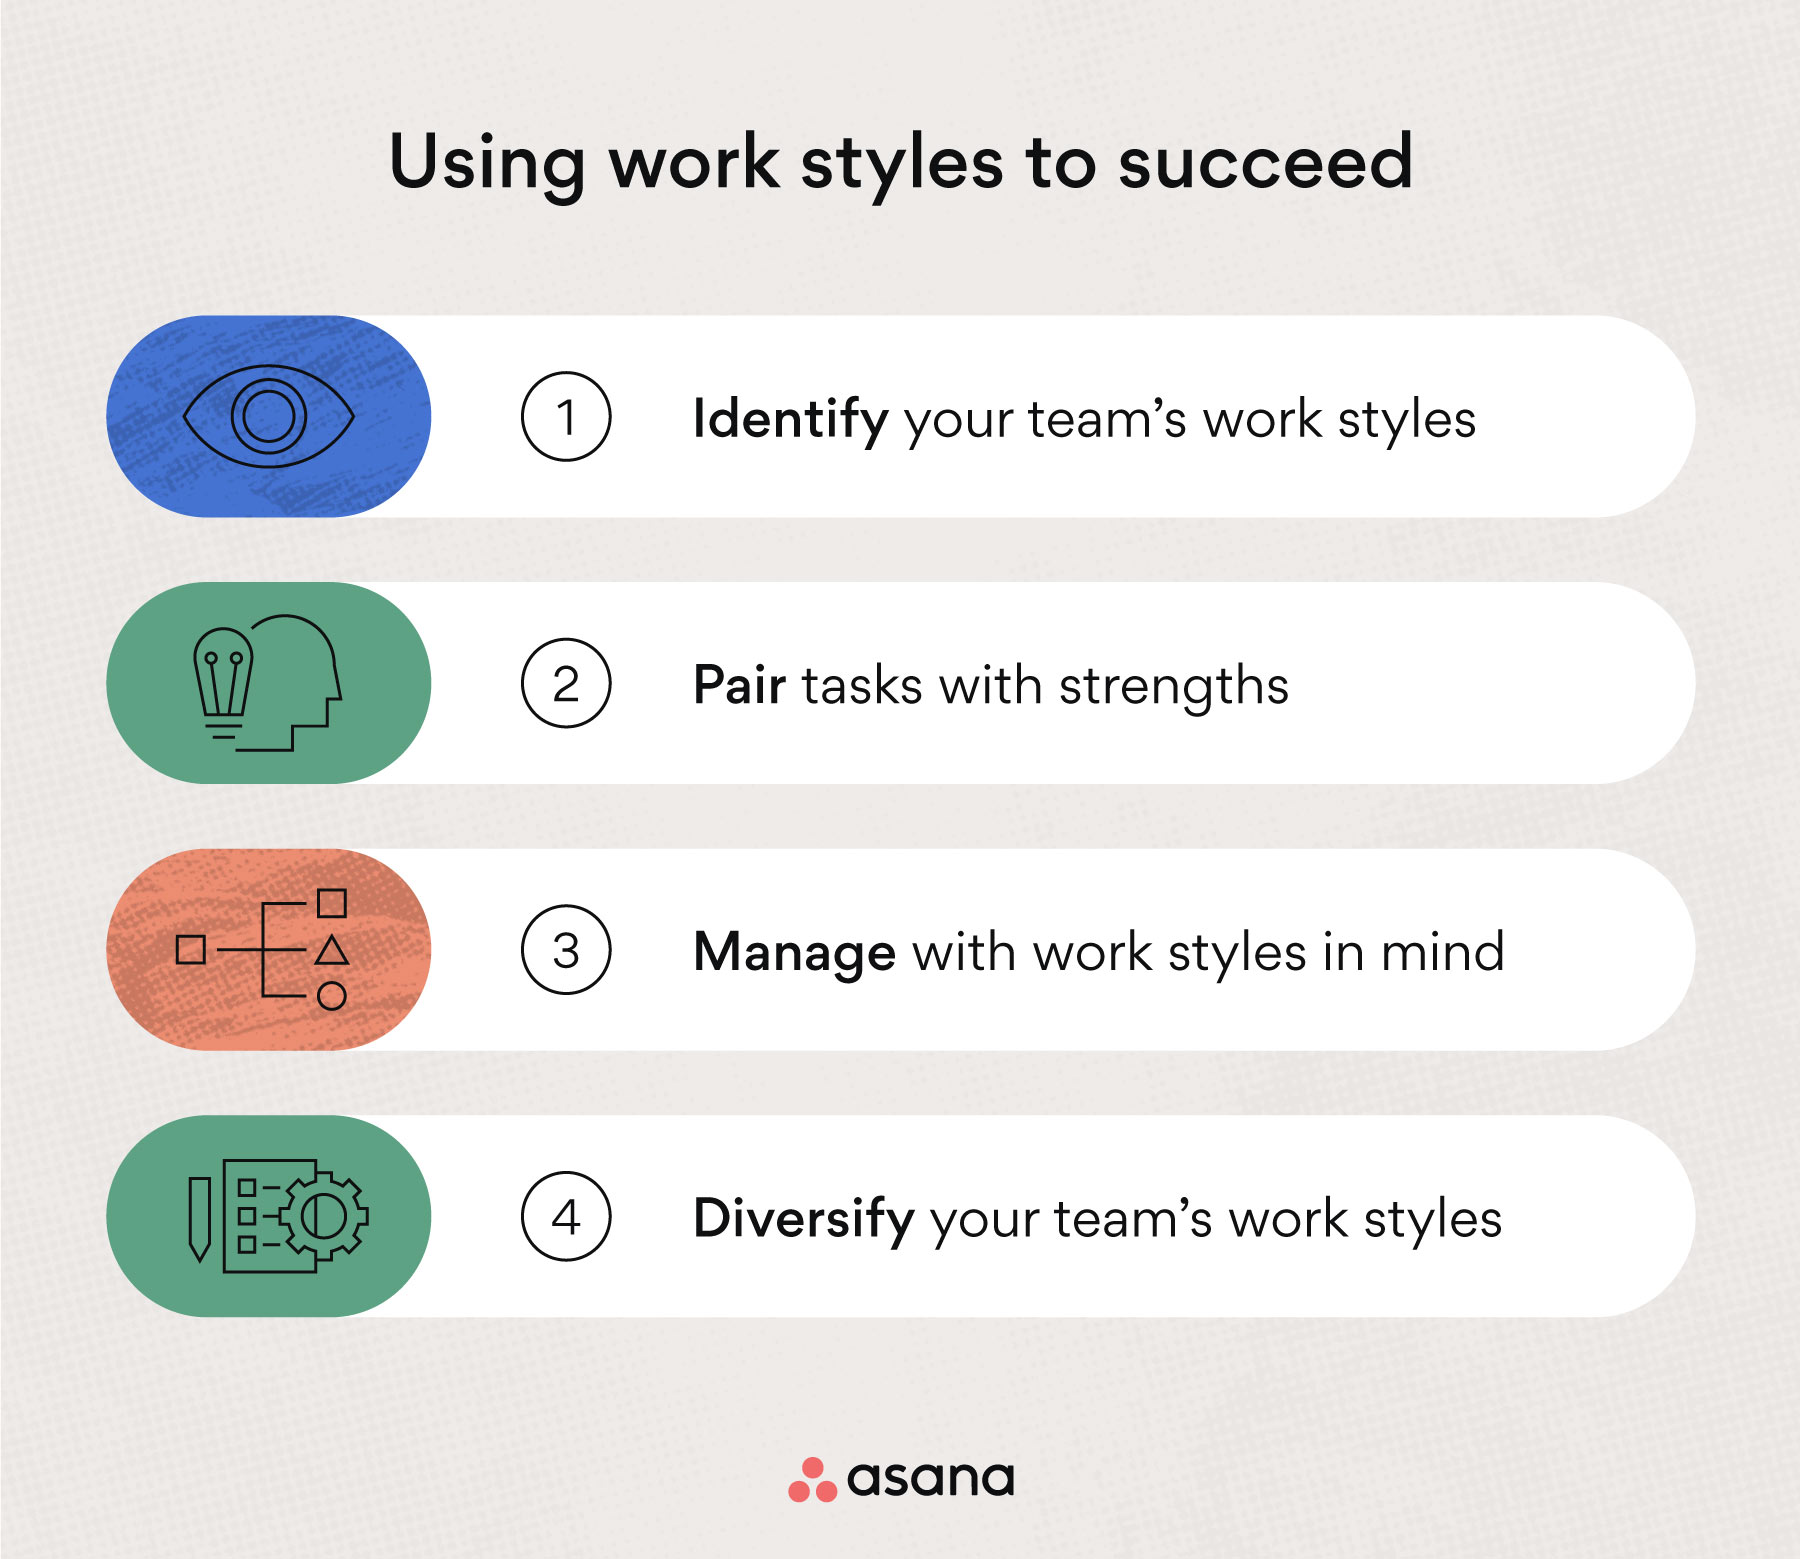 Using work styles to succeed